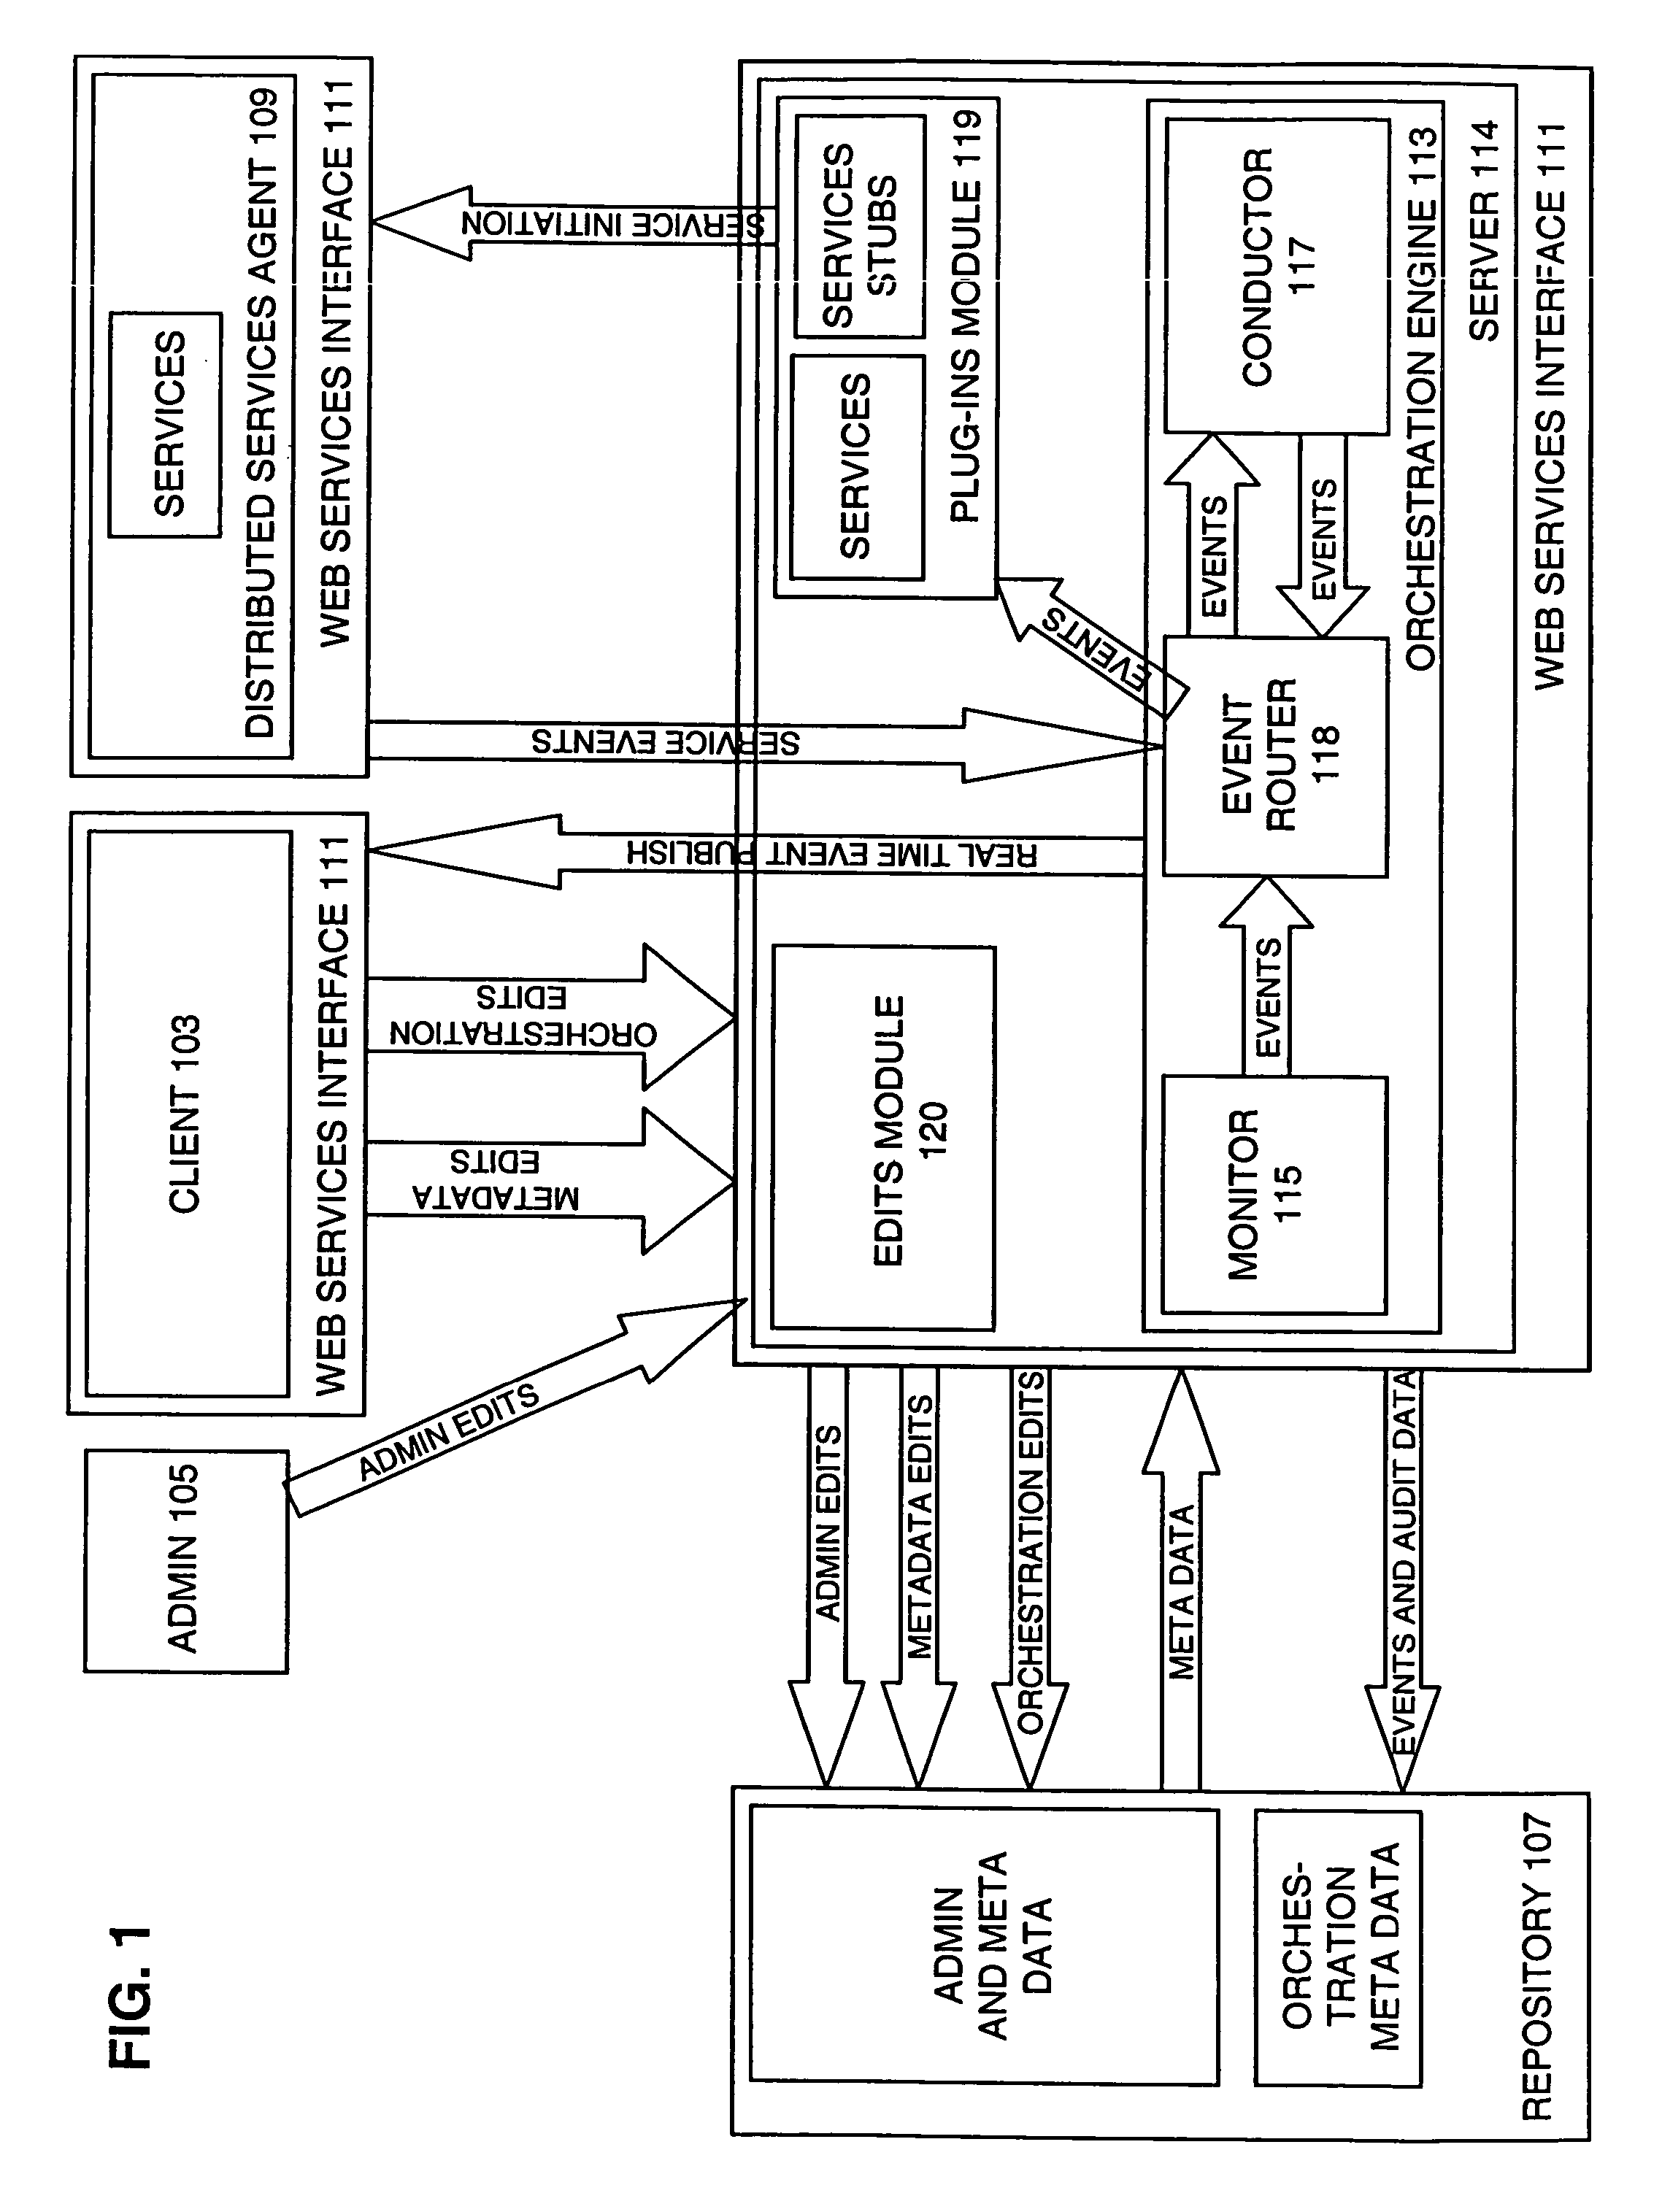 Event sensing and meta-routing process automation